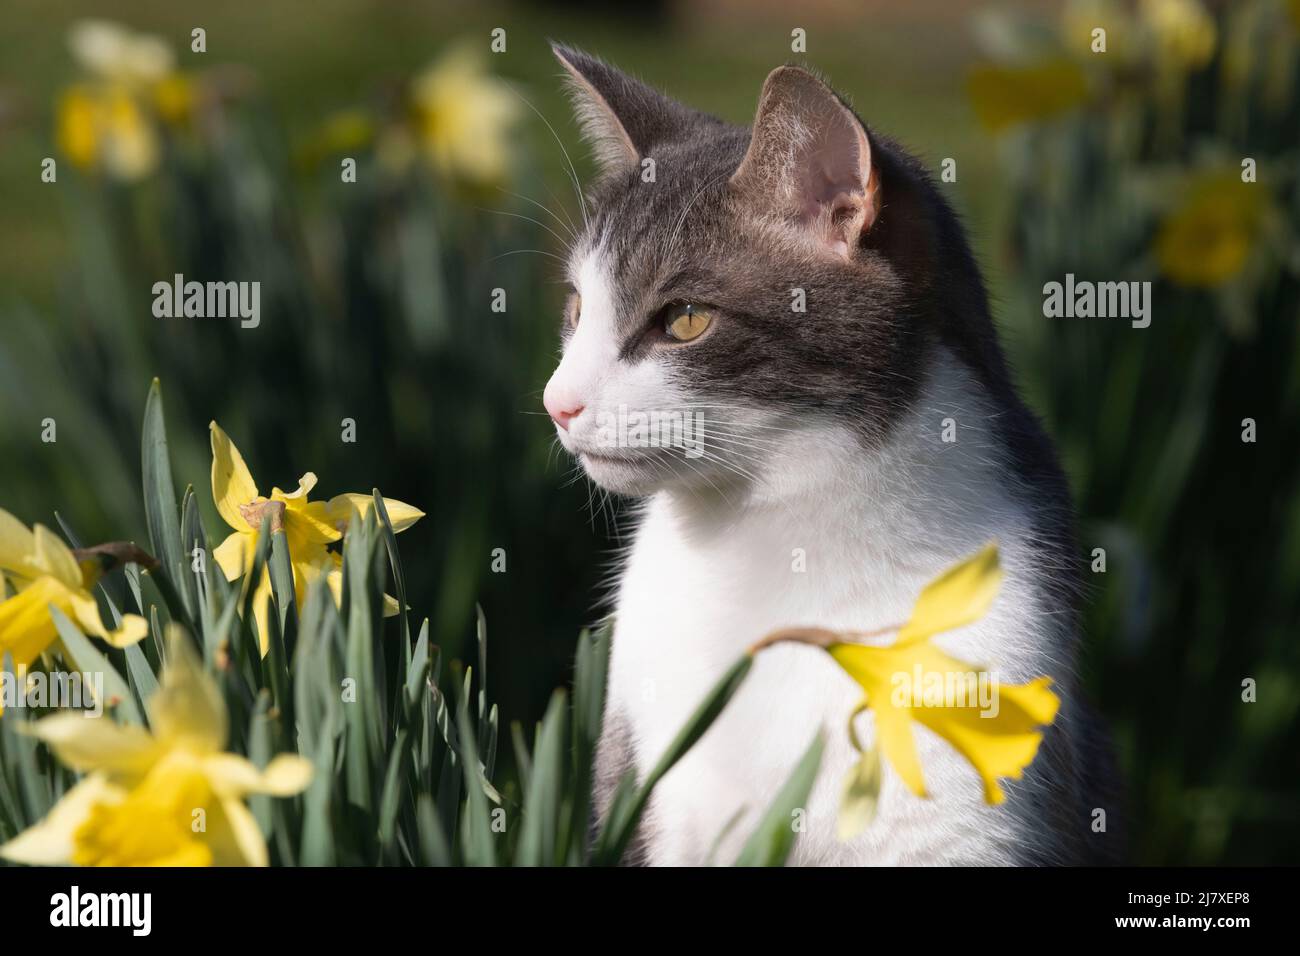 A Grey and White Tabby Cat Sitting in a Garden Amongst Daffodils in Spring Sunshine Stock Photo